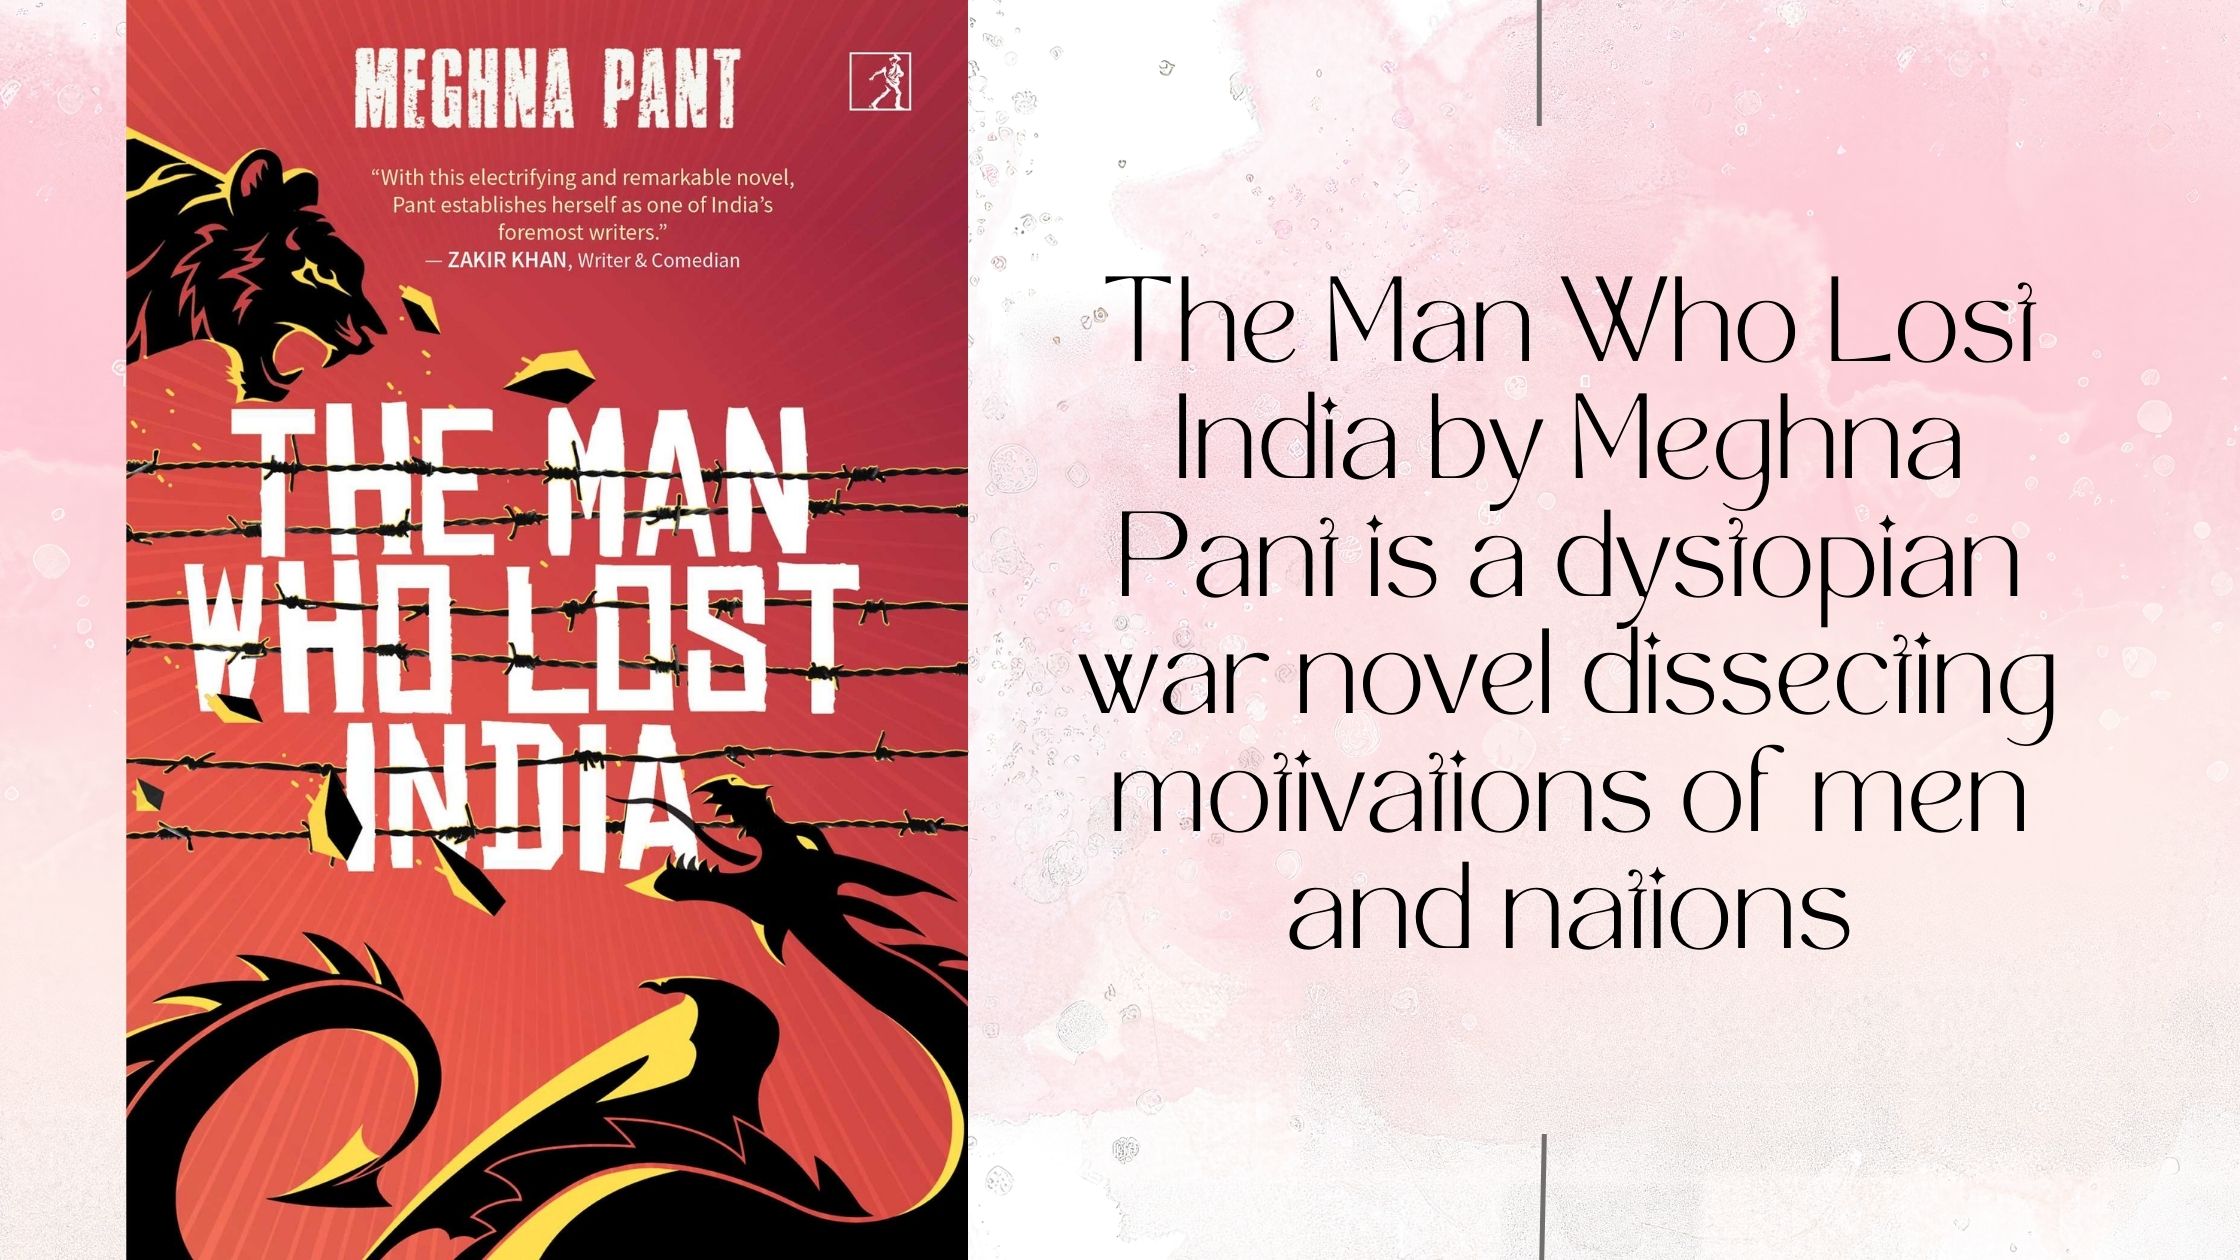 The Man Who Lost India by Meghna Pant is a dystopian war novel dissecting motivations of men and nations